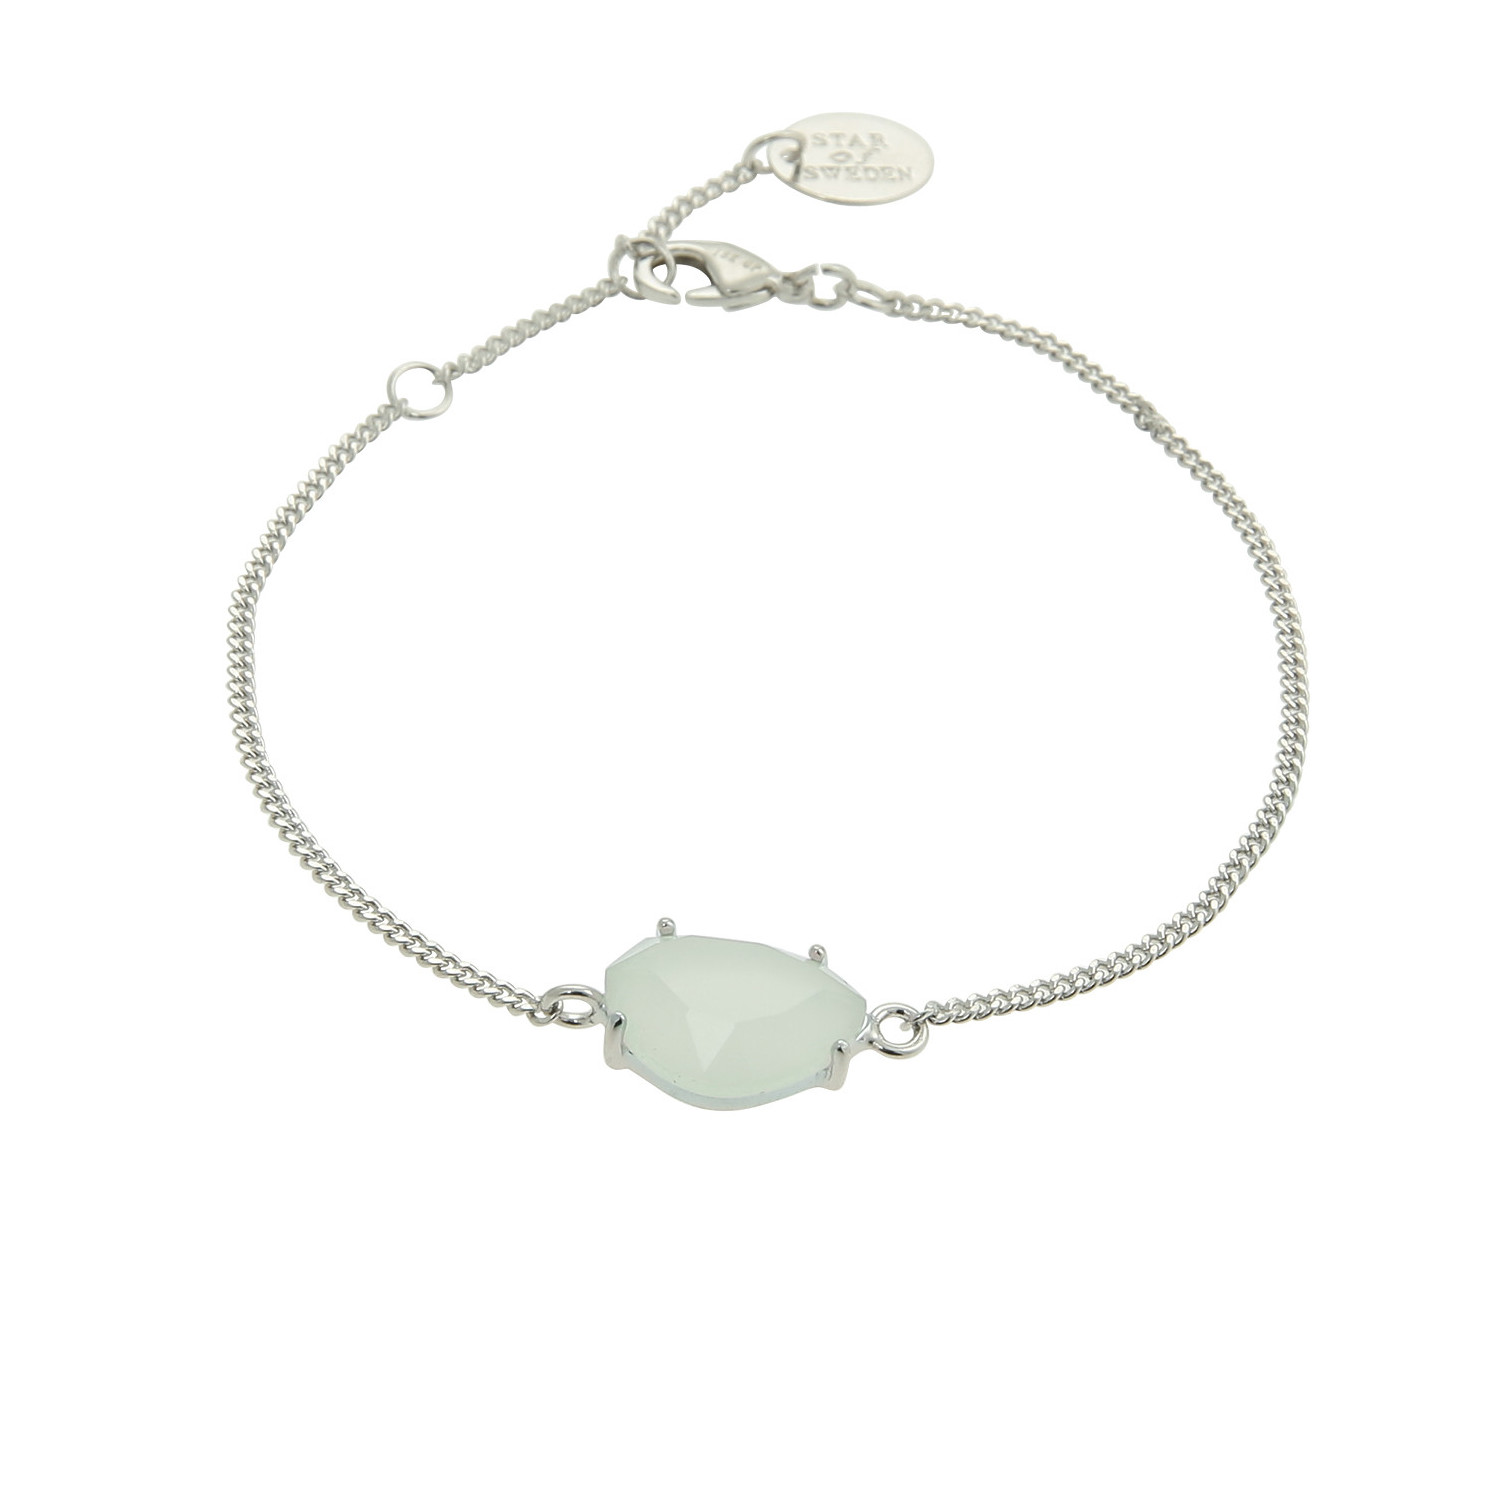 Silver bracelet with green stone